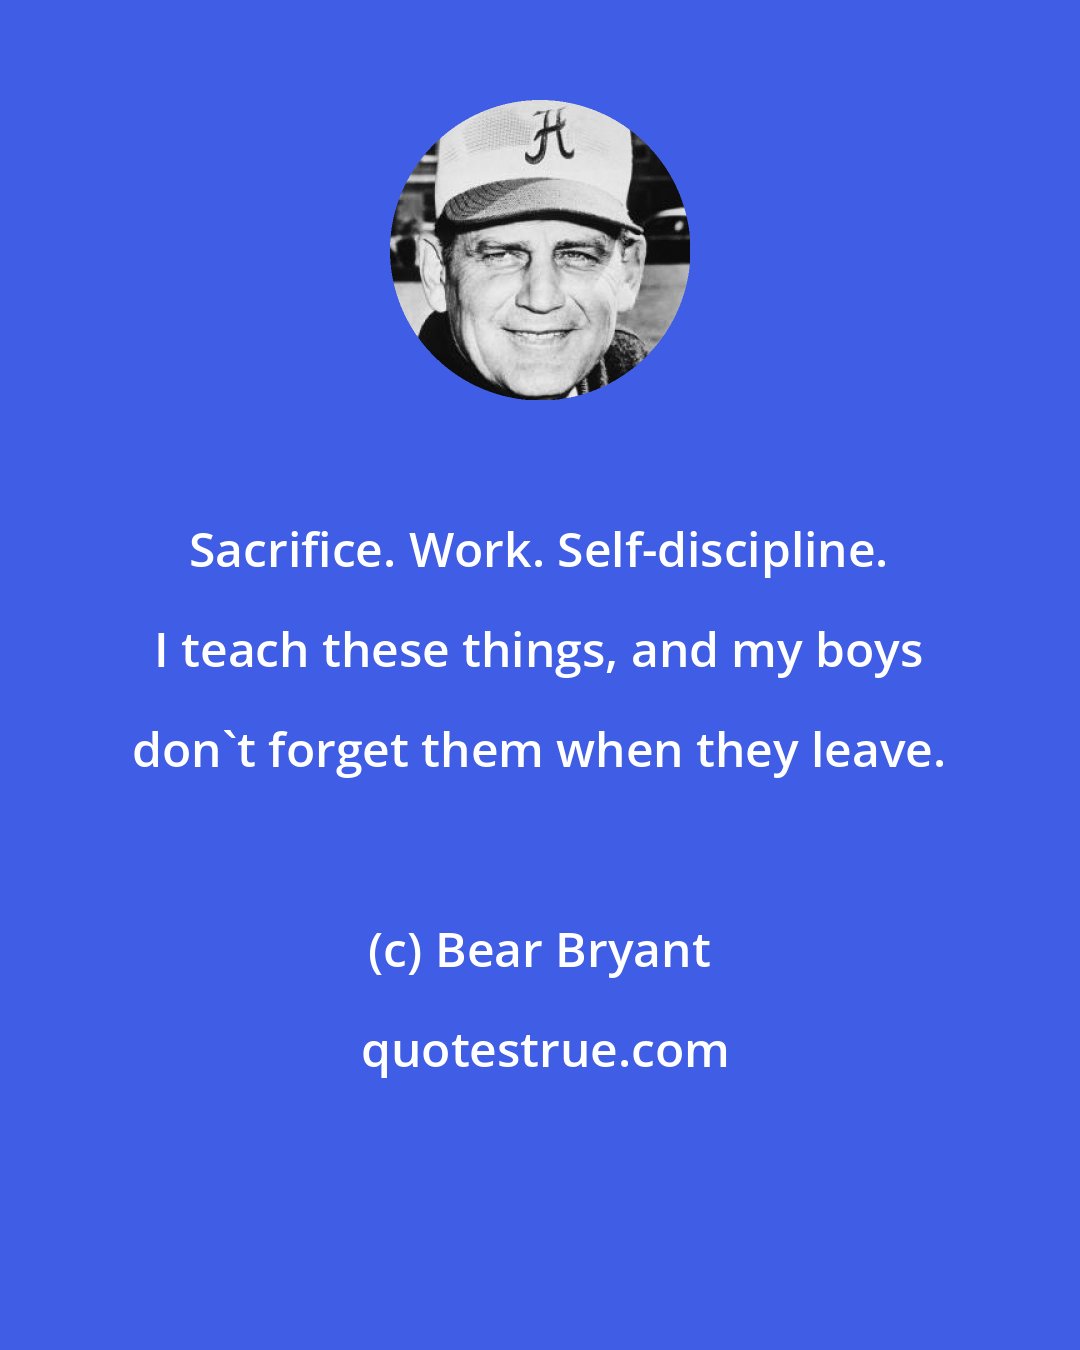 Bear Bryant: Sacrifice. Work. Self-discipline. I teach these things, and my boys don't forget them when they leave.